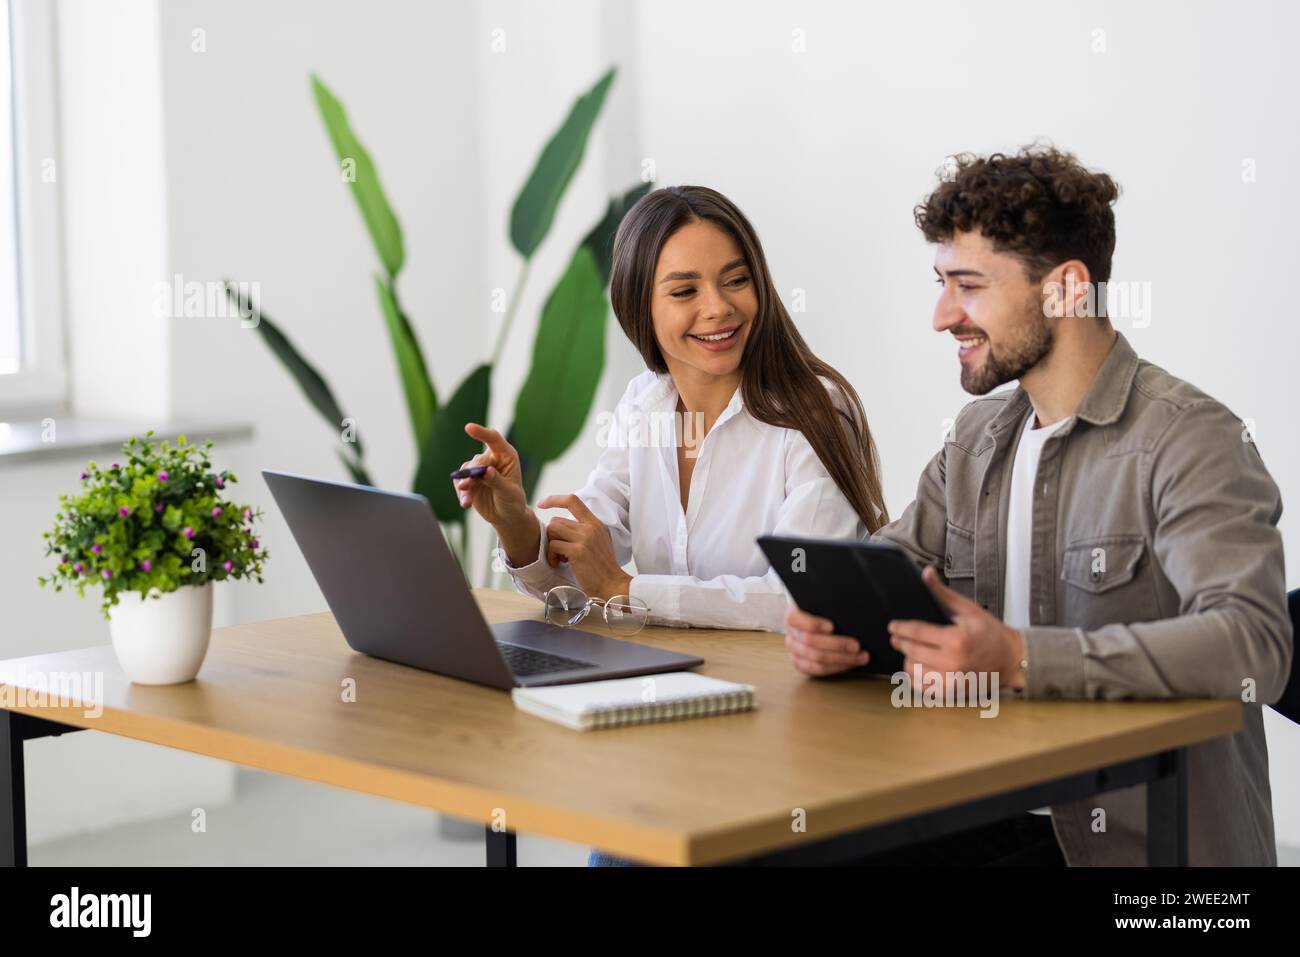 Busy couple working at the office doing business together Stock Photo